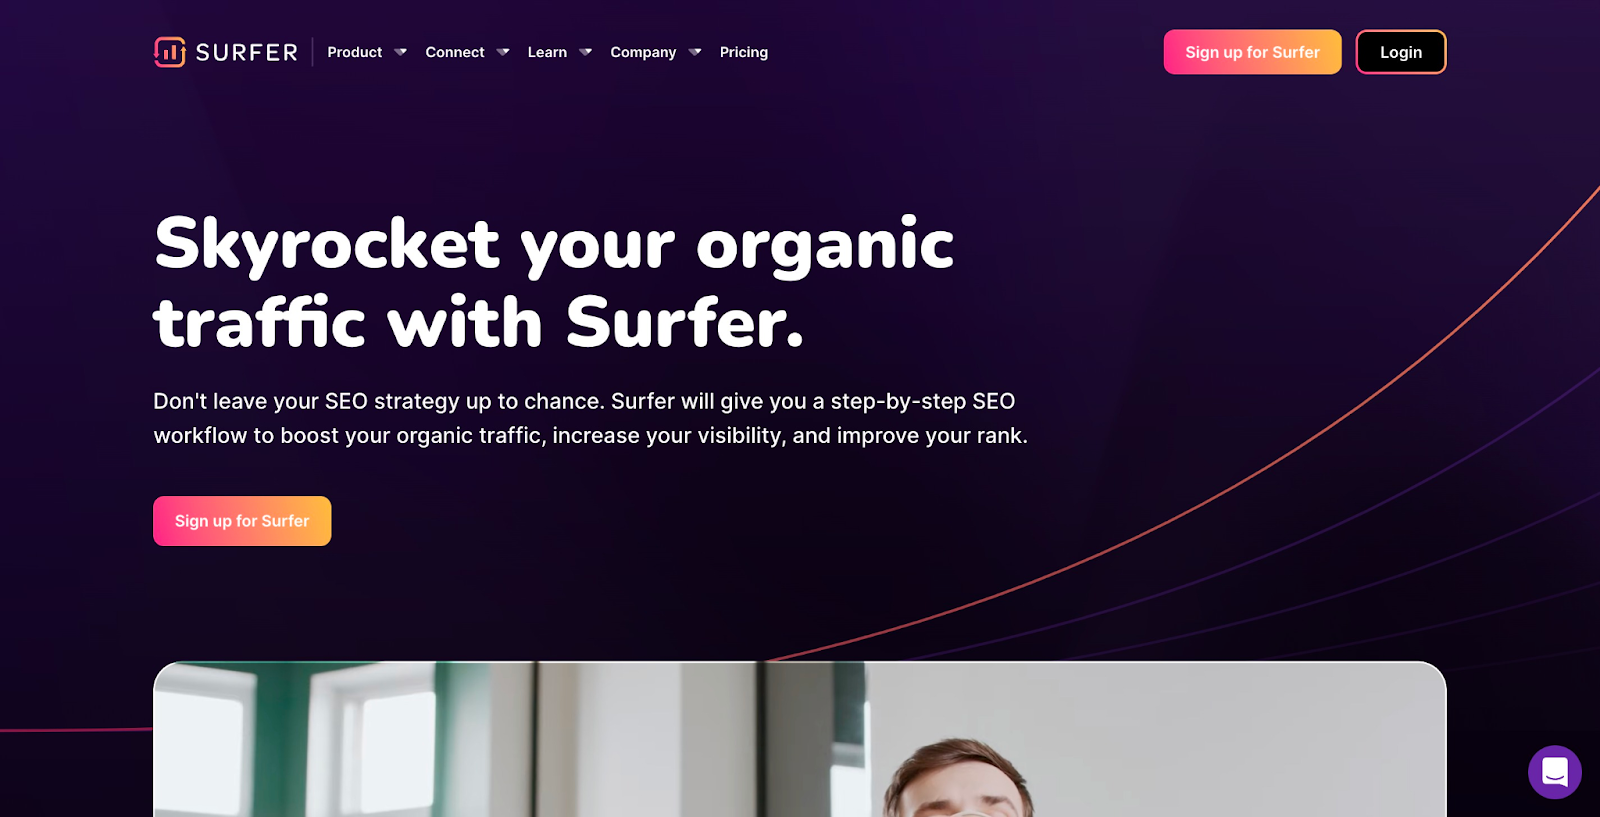 surferseo review free trial promo